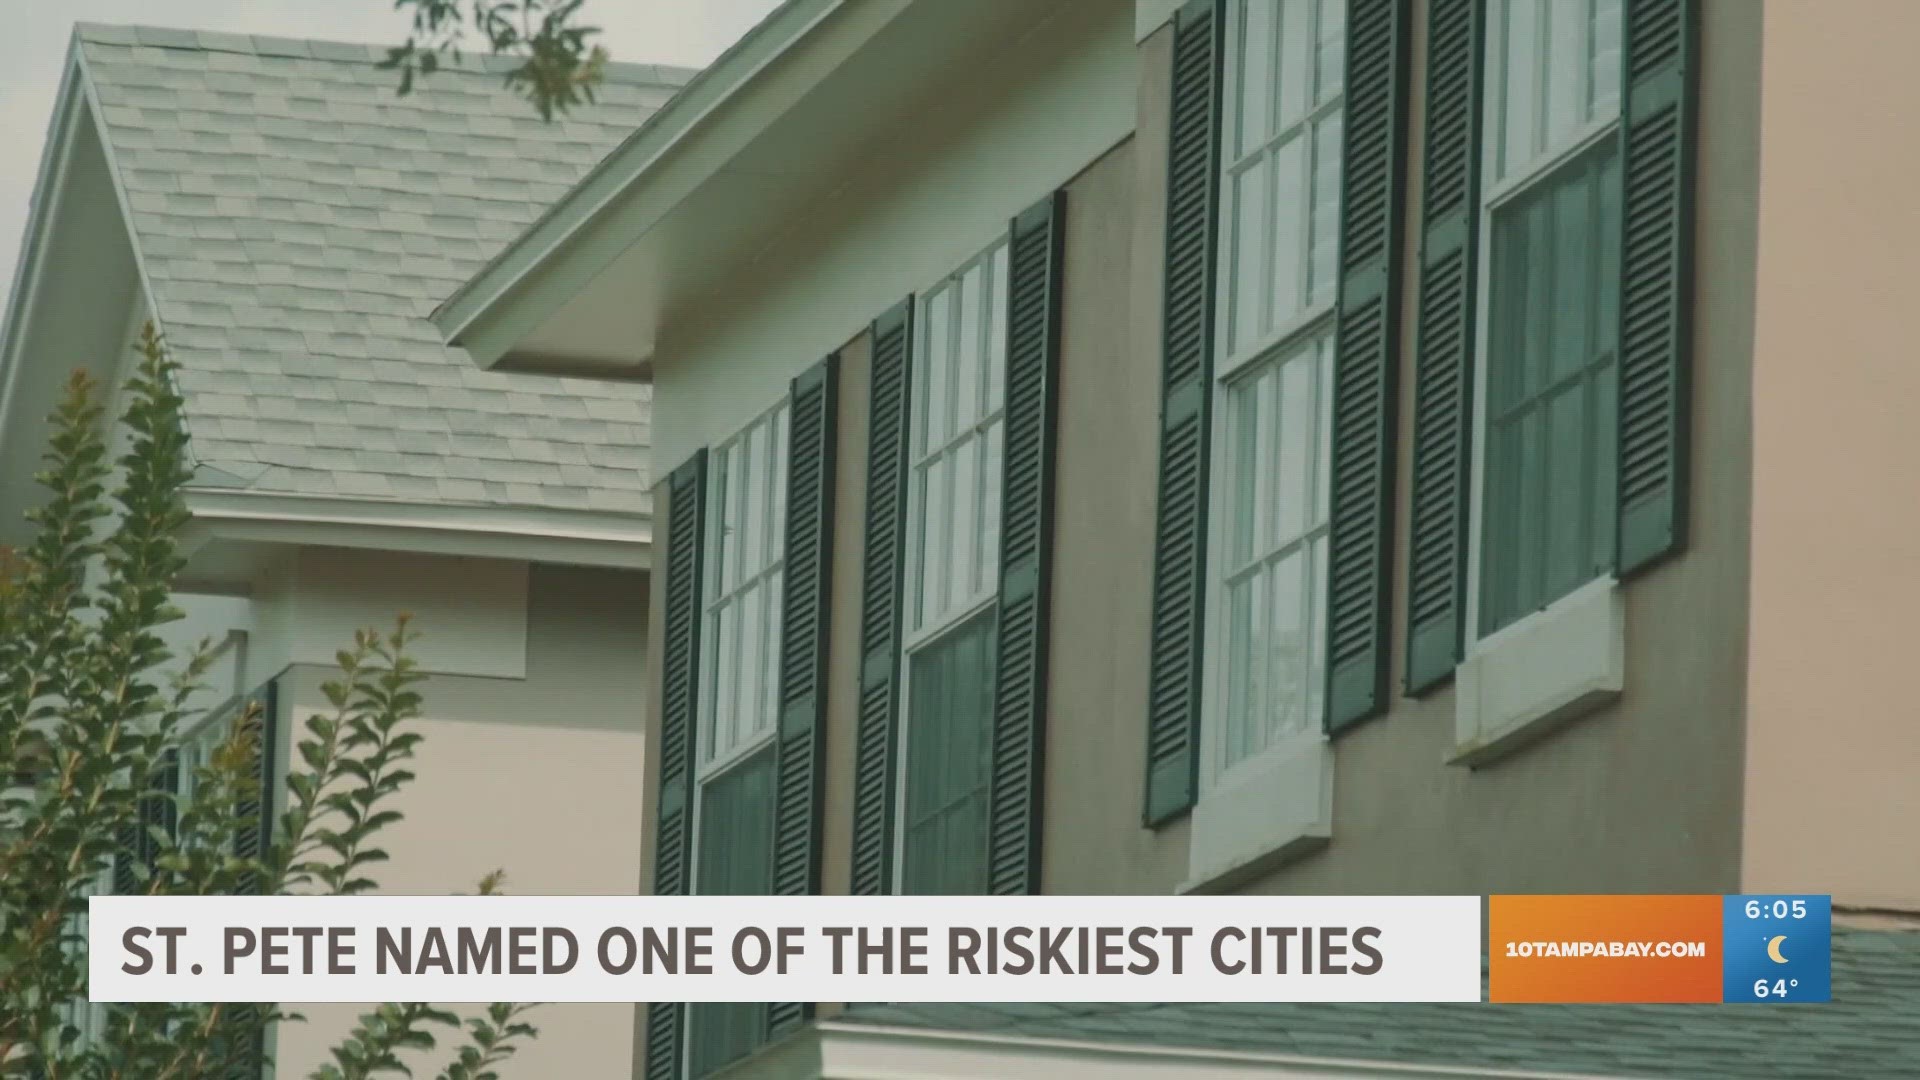 A study said properties in Florida are overvalued and at high risk of flooding, with the issue expected to get worse.